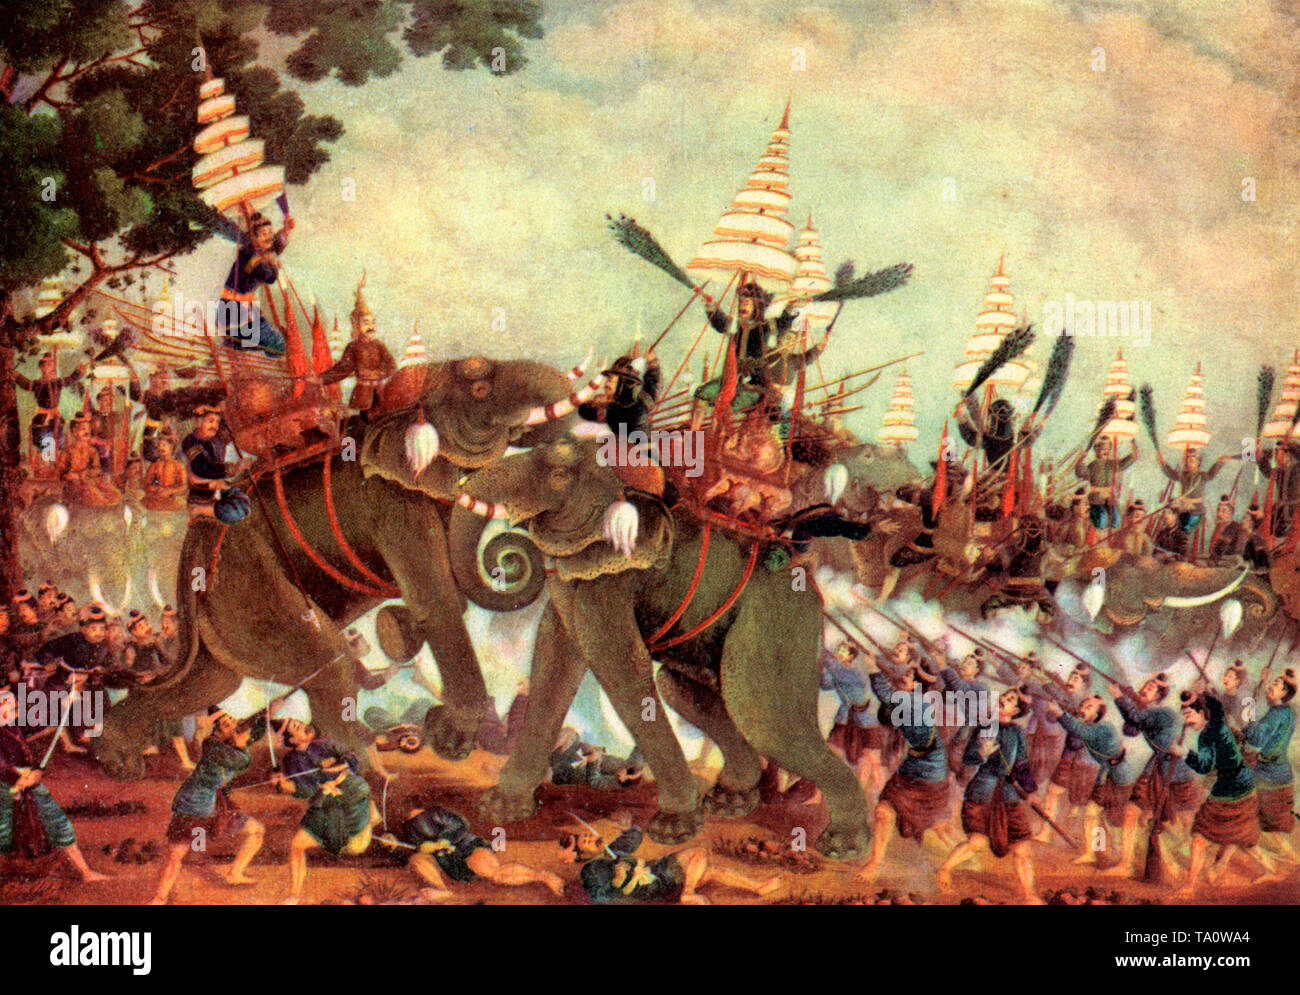 An incident in the wars between the Siamese and Burmese. A 17th or 18th century painting by a Siamese artist. Siamese King Naresuan fighting the Burmese crown prince Mingyi Swa at the battle of Yuthahatthi in January 1593. Stock Photo